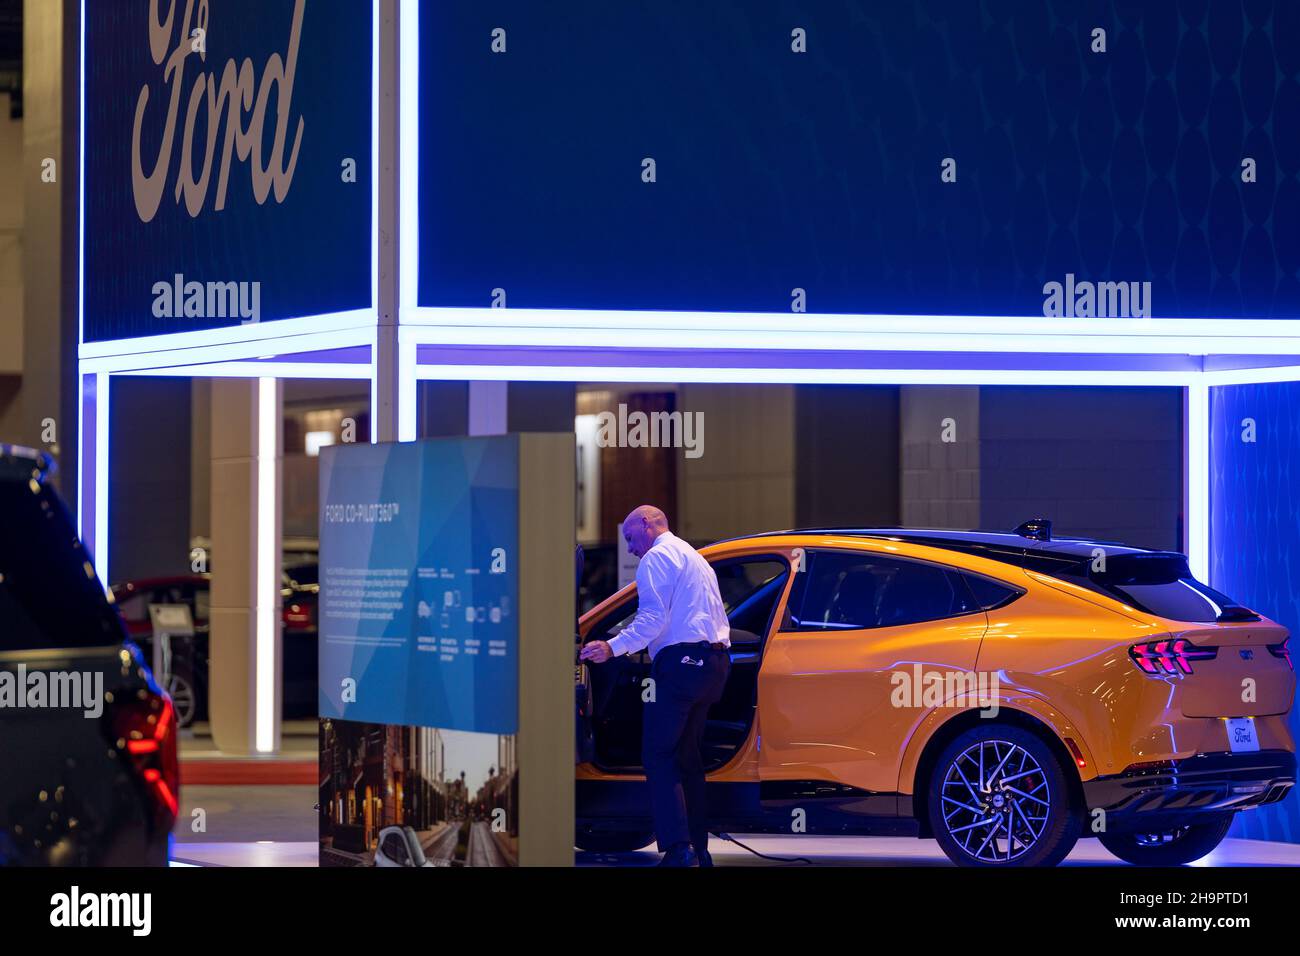 Florida Automobile Dealers Association present  the Miami International Auto Show runs from October 16 to 24, 2021 at Miami Beach Convention Center. Stock Photo